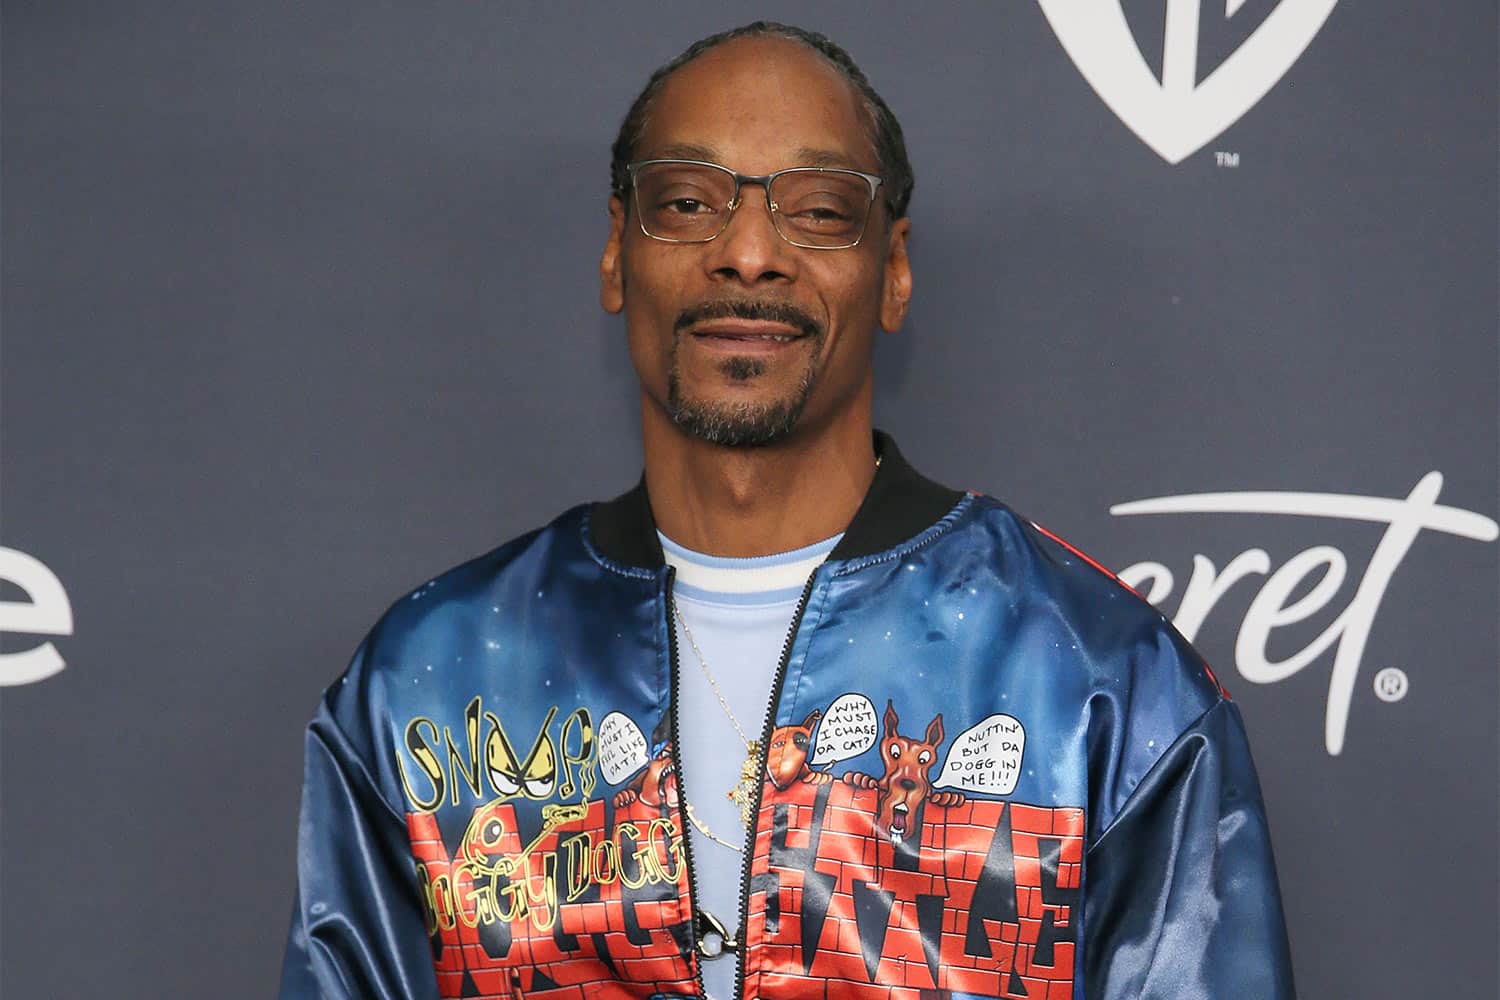 Snoop-dogg-collaborates-with-clay-nation-to-launch-nft-collection-on-cardano